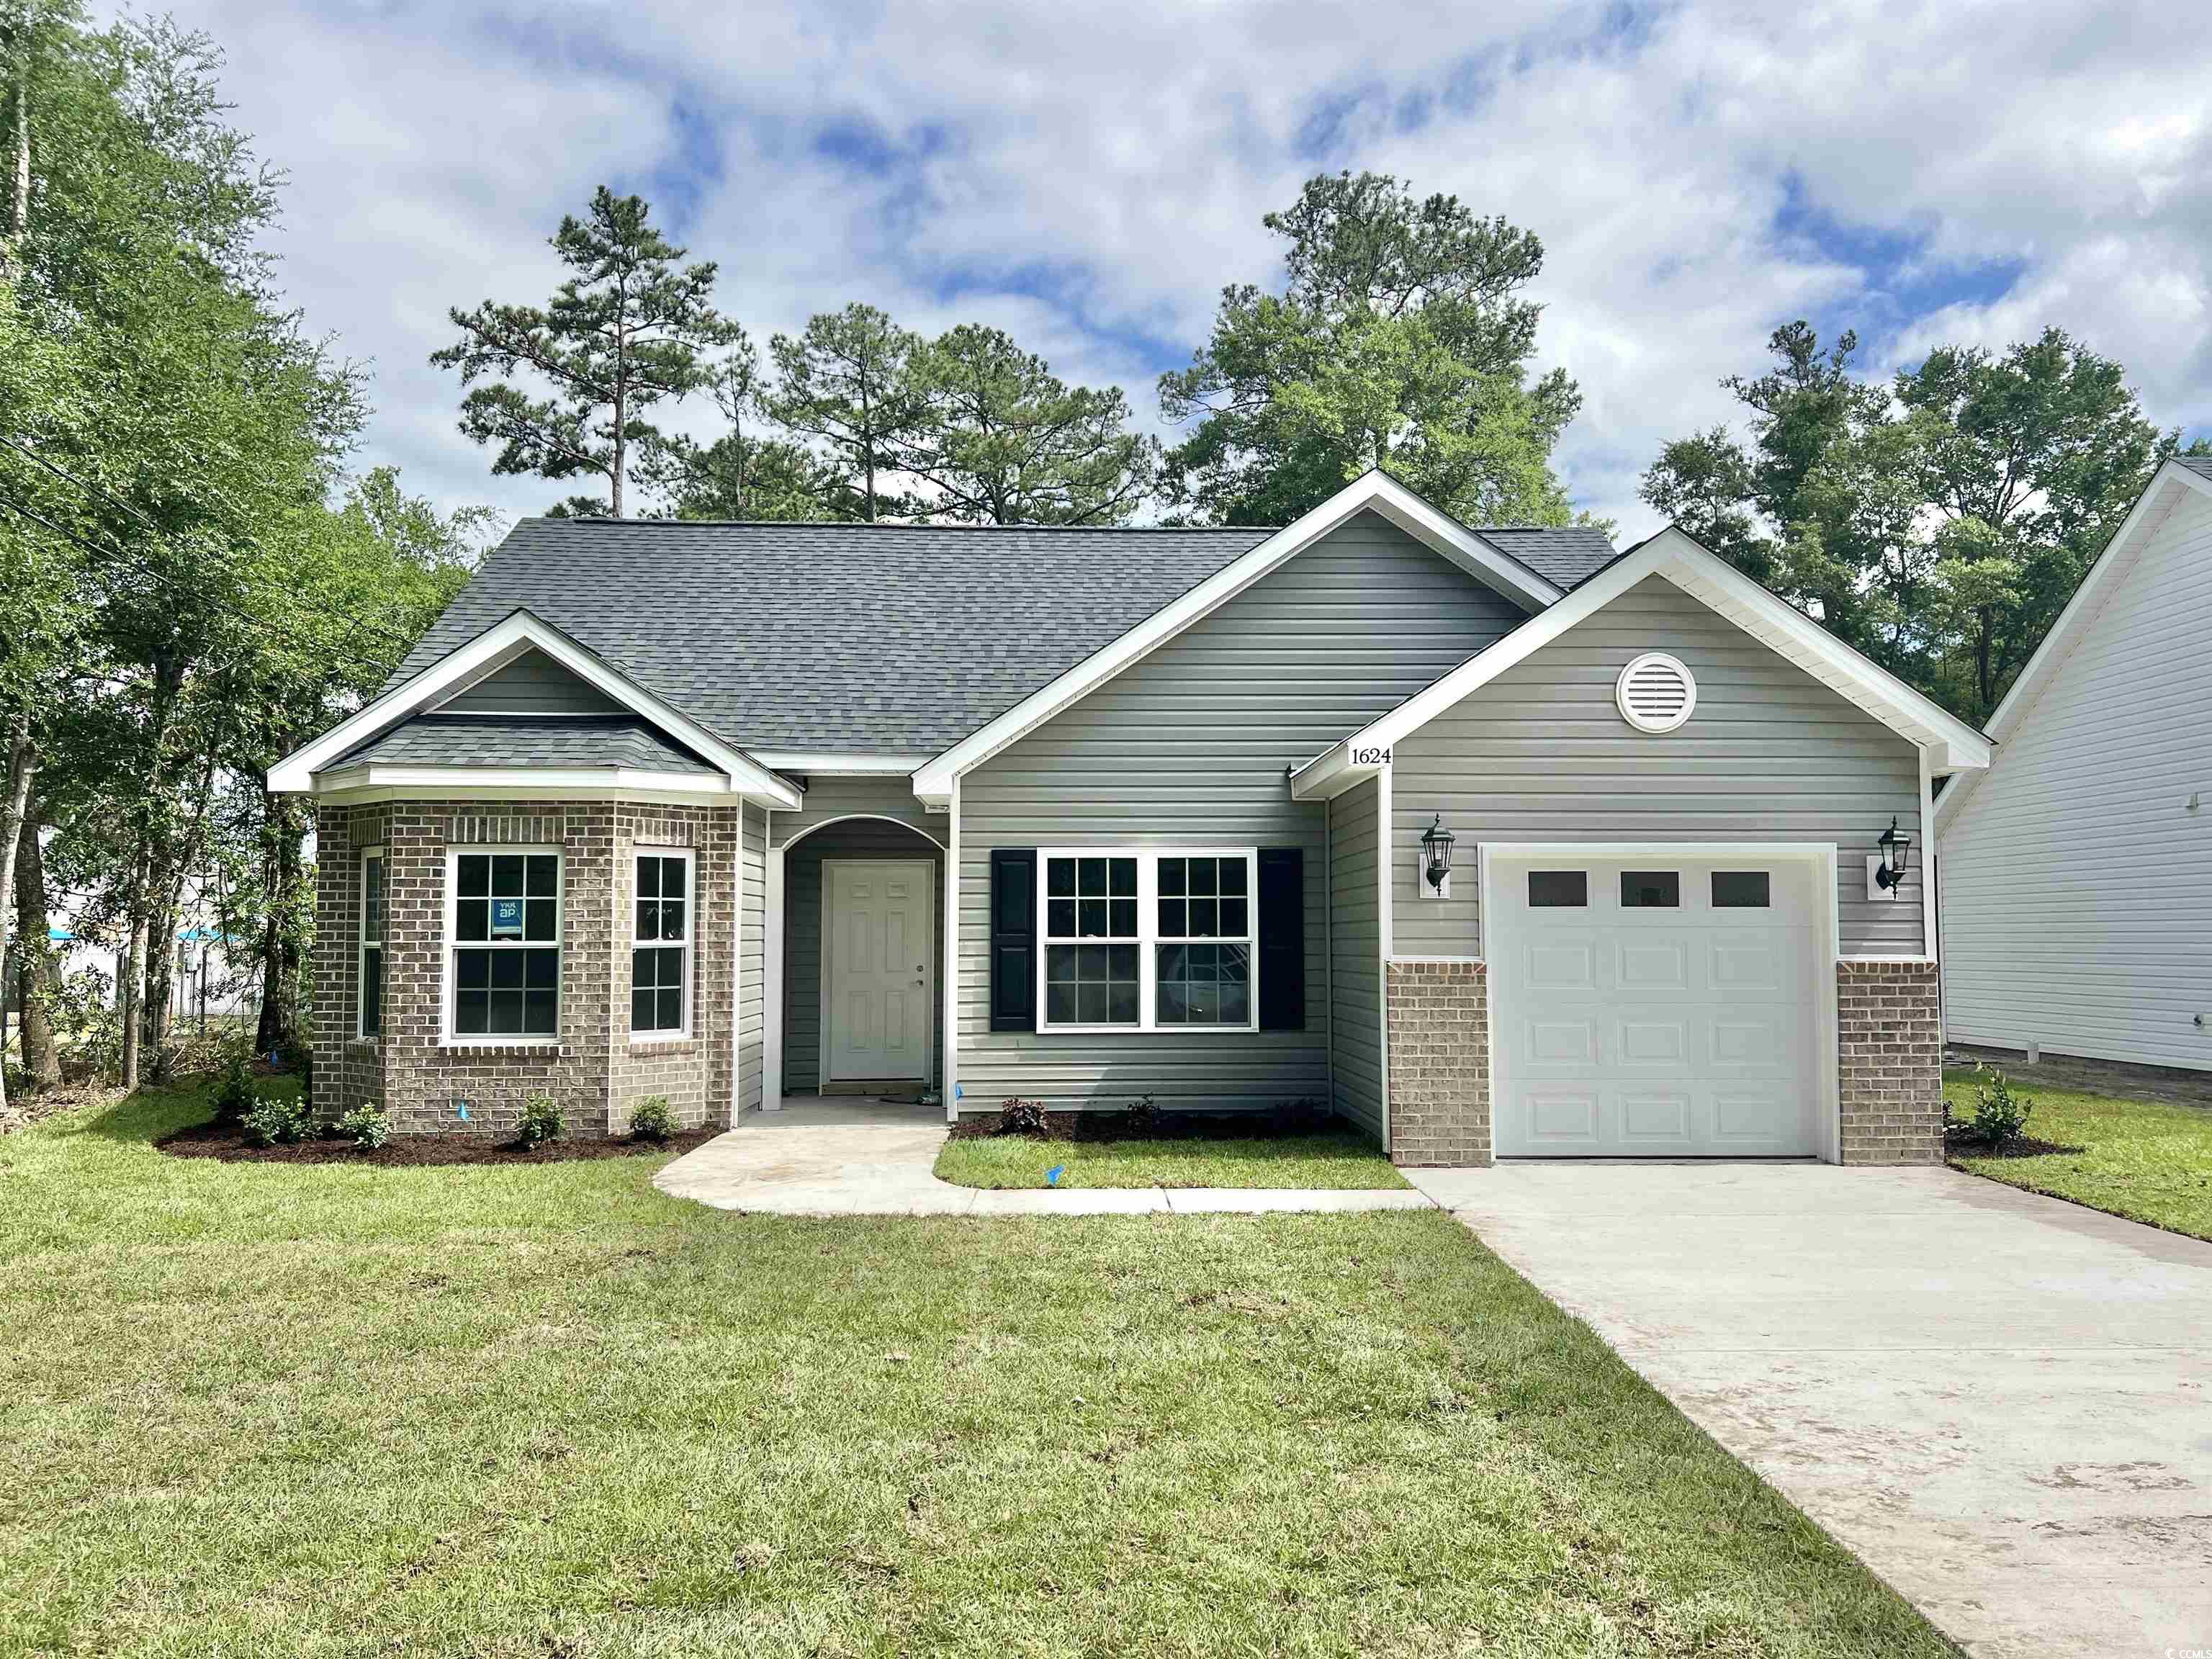 1624 San Andres Ave. Little River, SC 29566